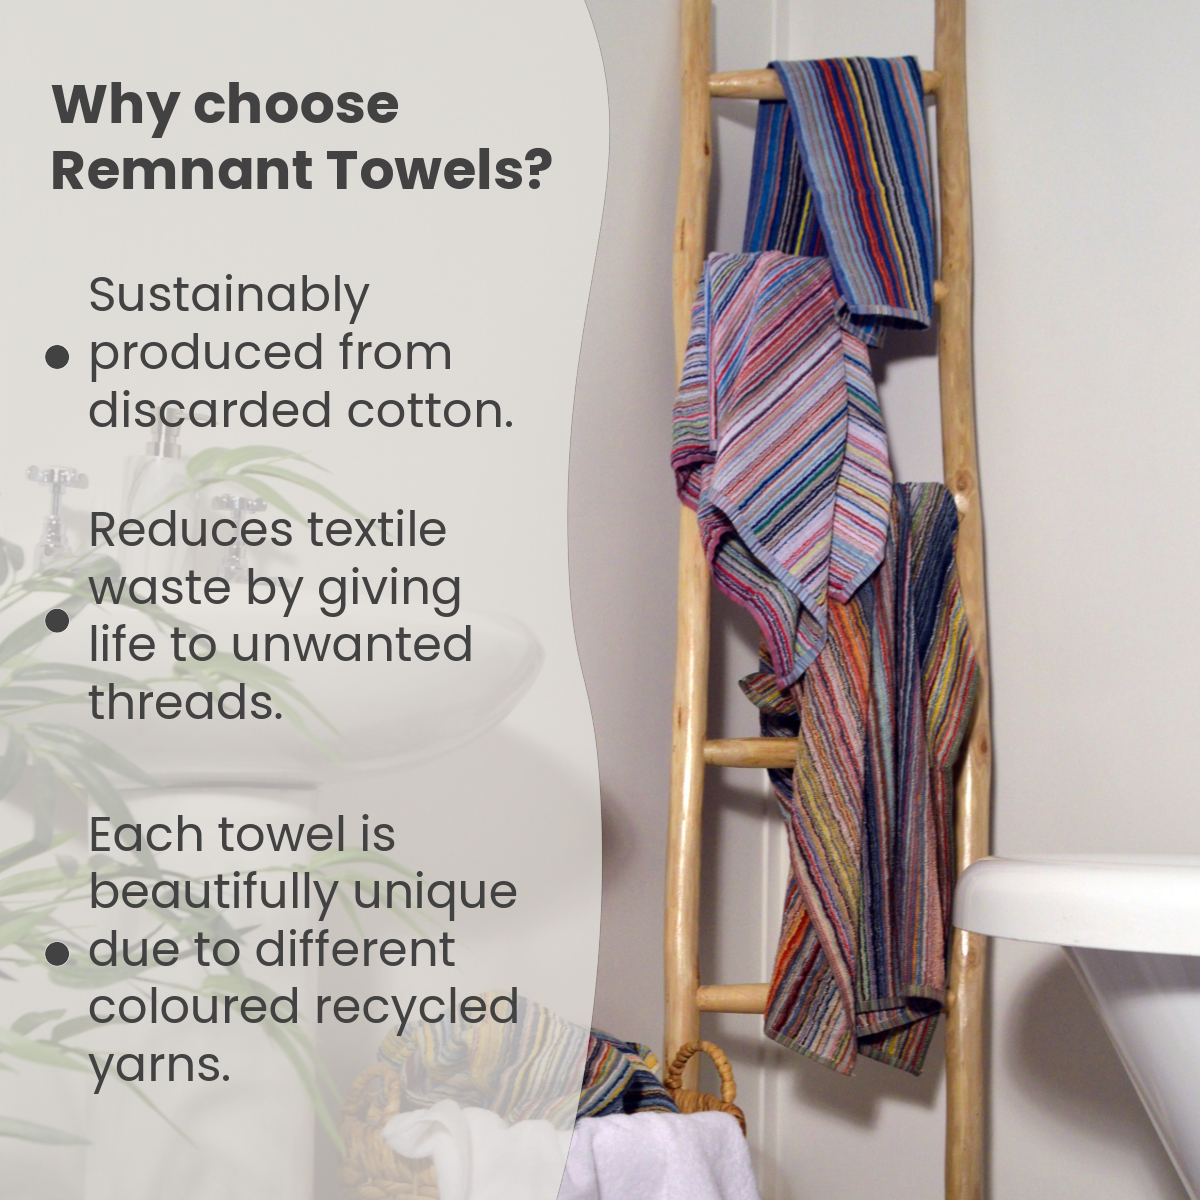 Happy #GlobalRecyclingDay! ♻️ We wanted to take the opportunity to shine a light on our beautiful and striking Remnant Towels, made exclusively of 100% recycled cotton. We are giving new life to discarded & unused cotton yarns. Try them for yourself 👉 bit.ly/recycled-cotto…